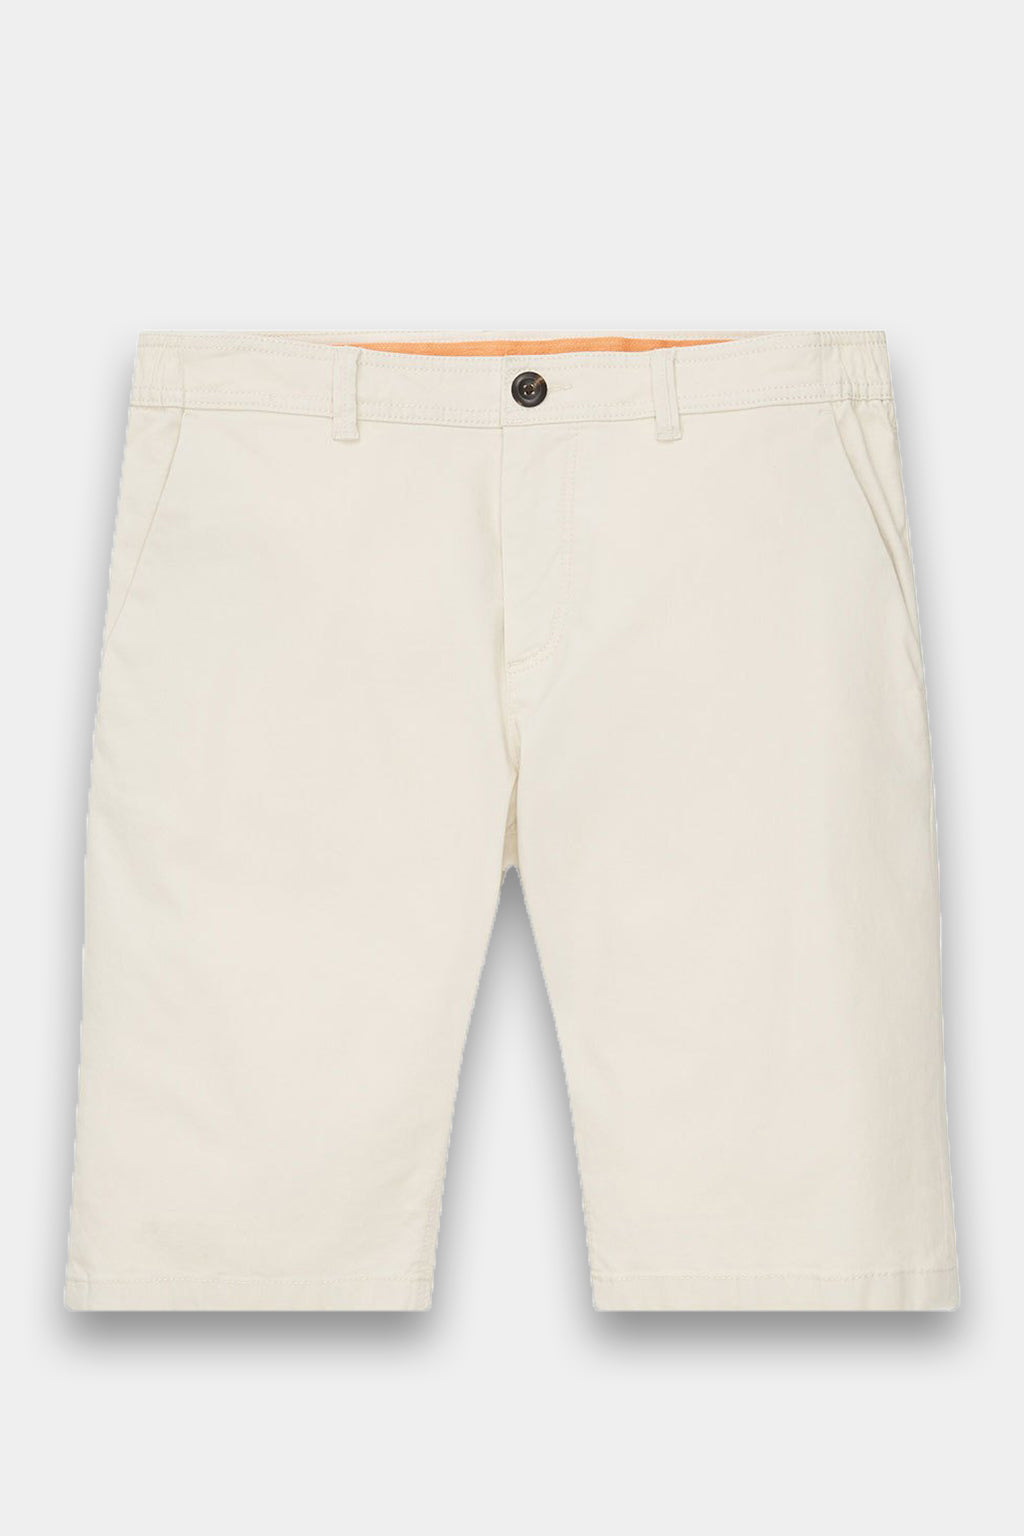 Tom Tailor - Men's Slim Chino Bermuda Shorts With Stretch